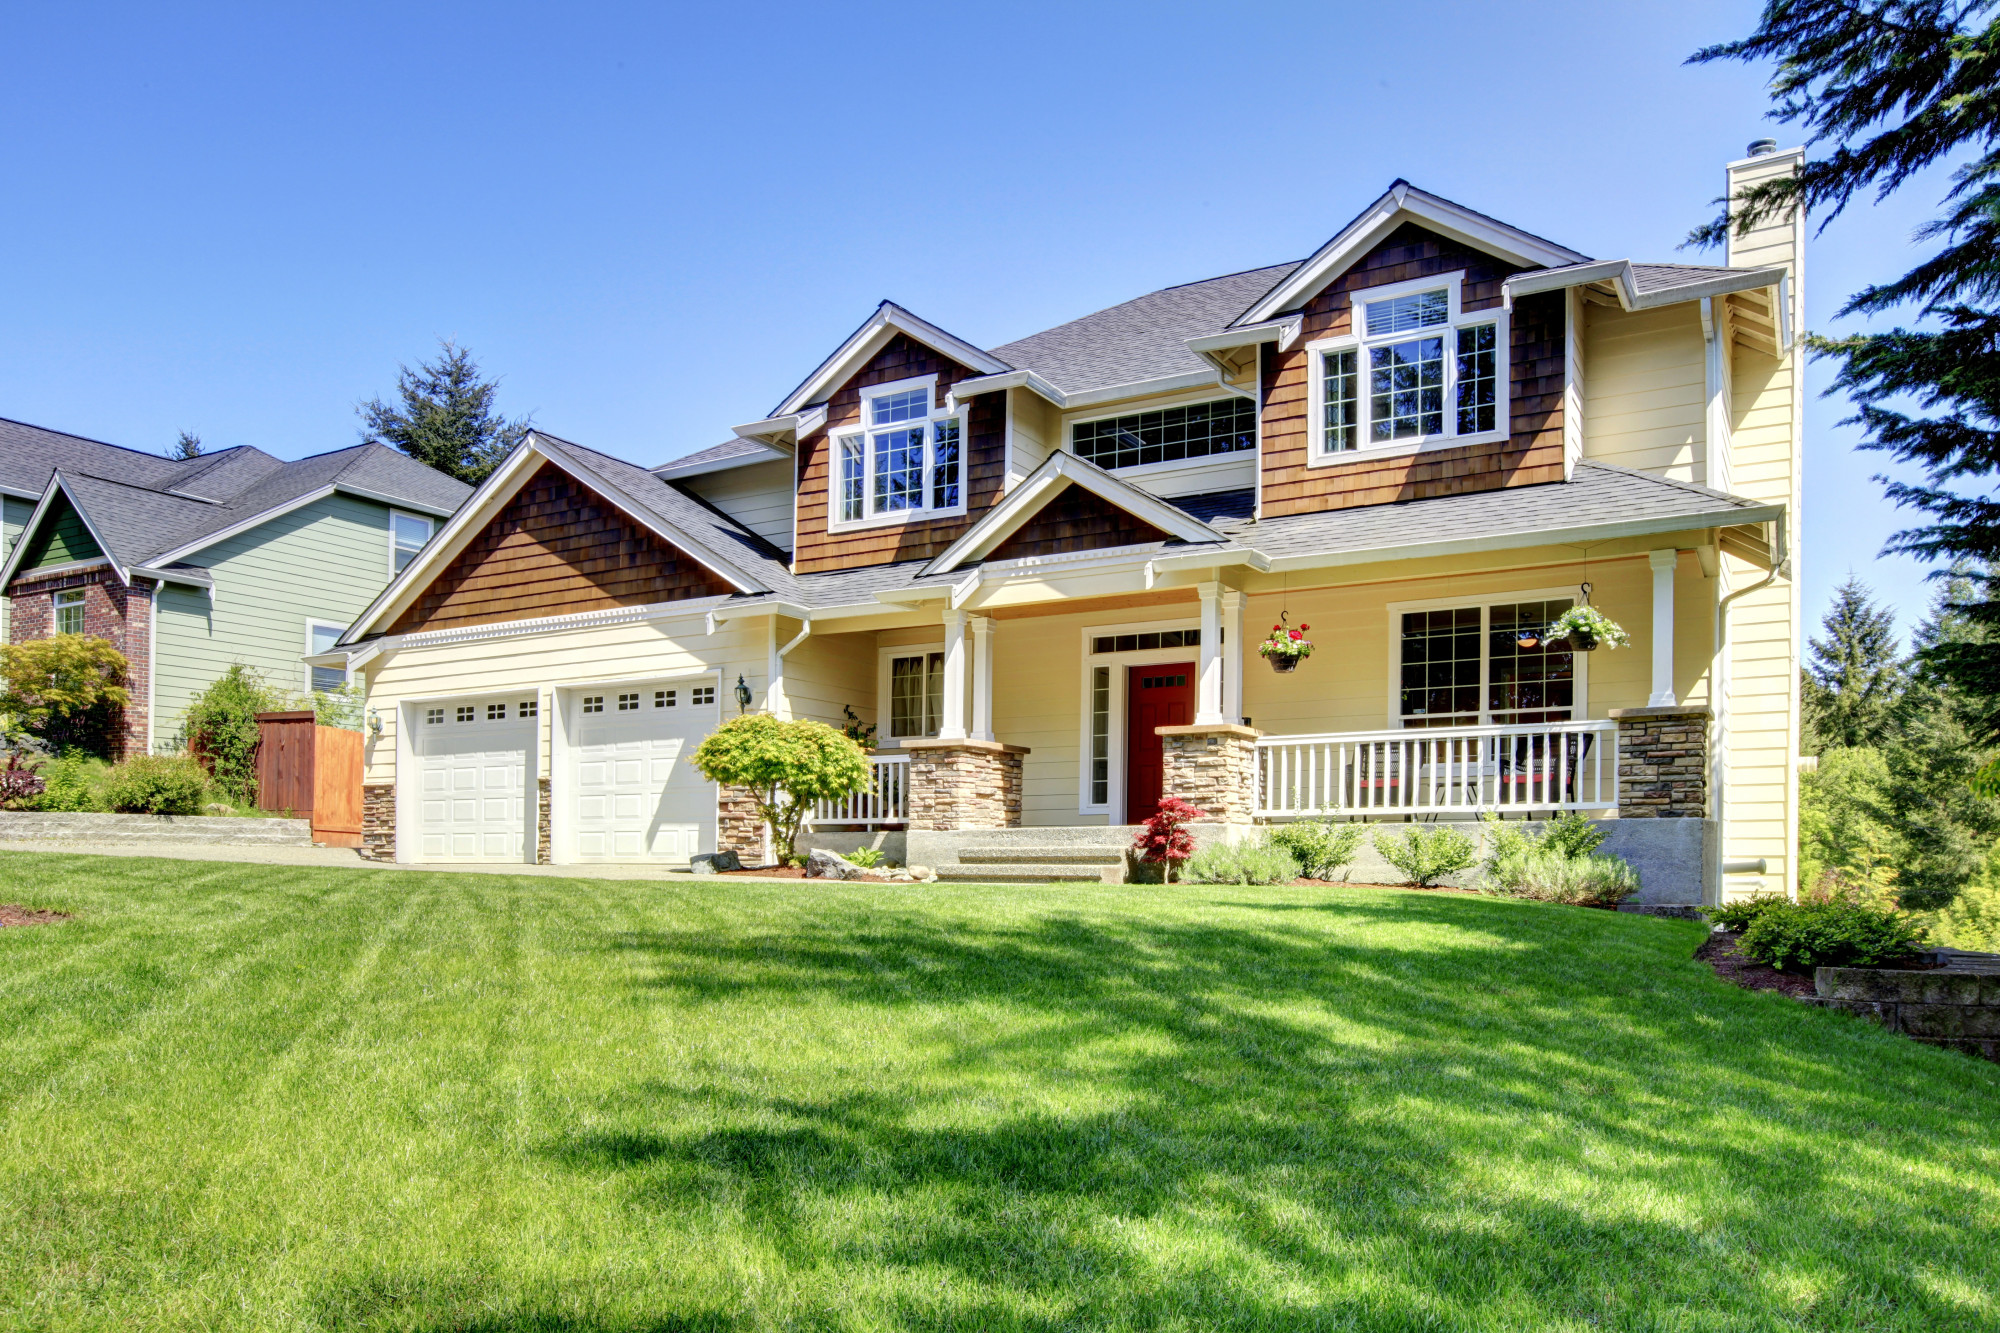 As a homeowner, it is important to clean both the inside and outside of your house. Here is a quick guide to home exterior cleaning.